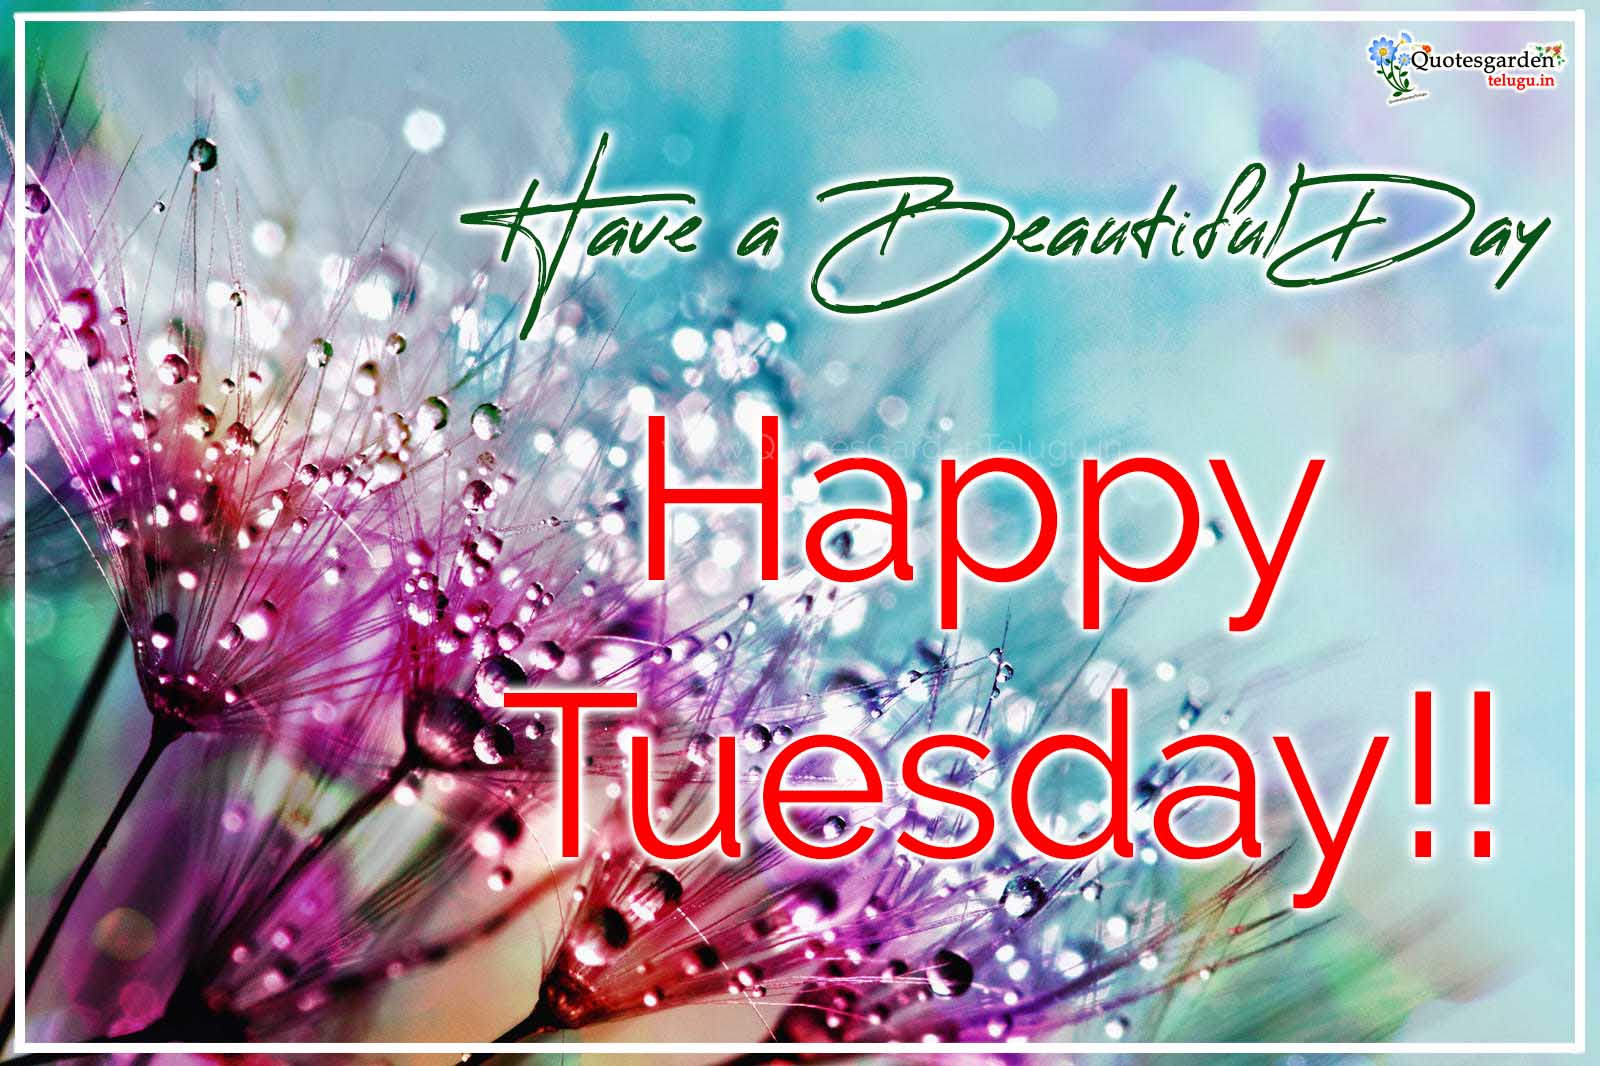 beautiful happy tuesday image with top .quotesgardentelugu.in